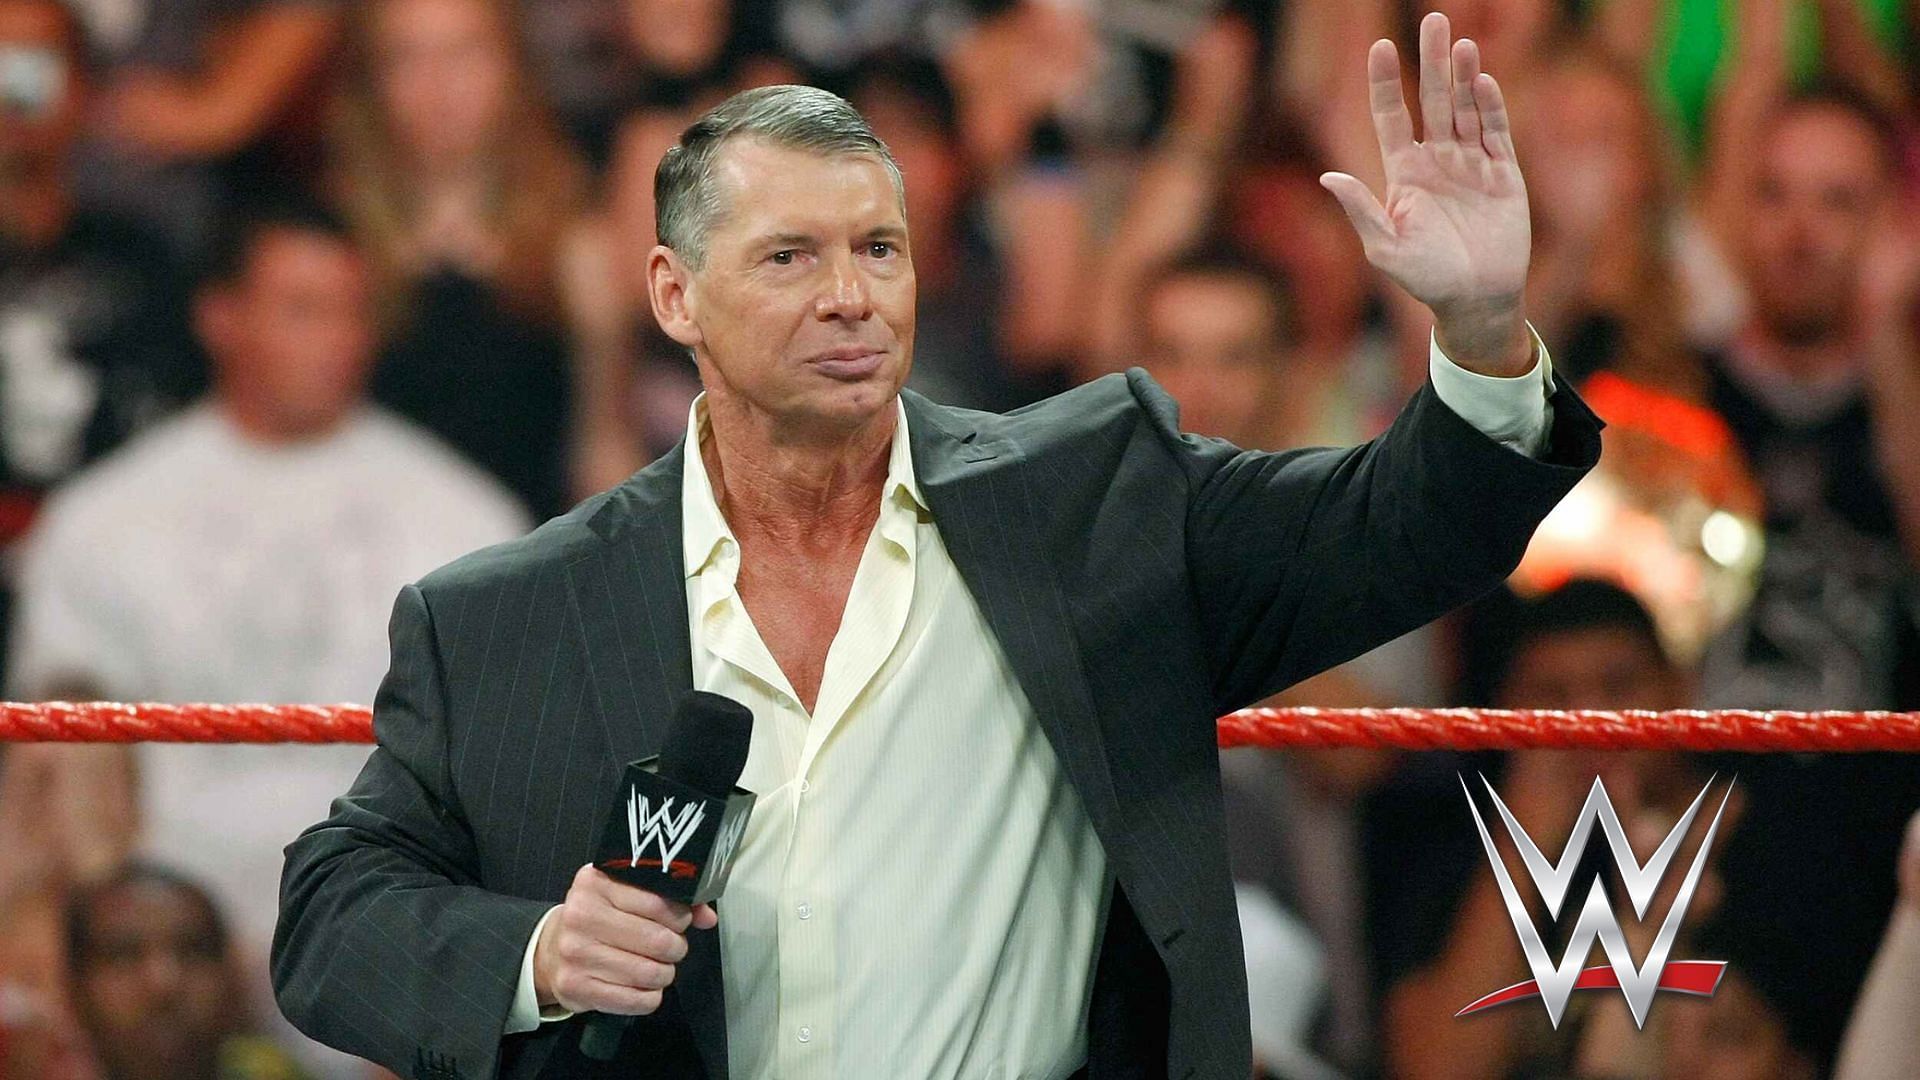 Vince McMahon is rumored to be looking to sell WWE